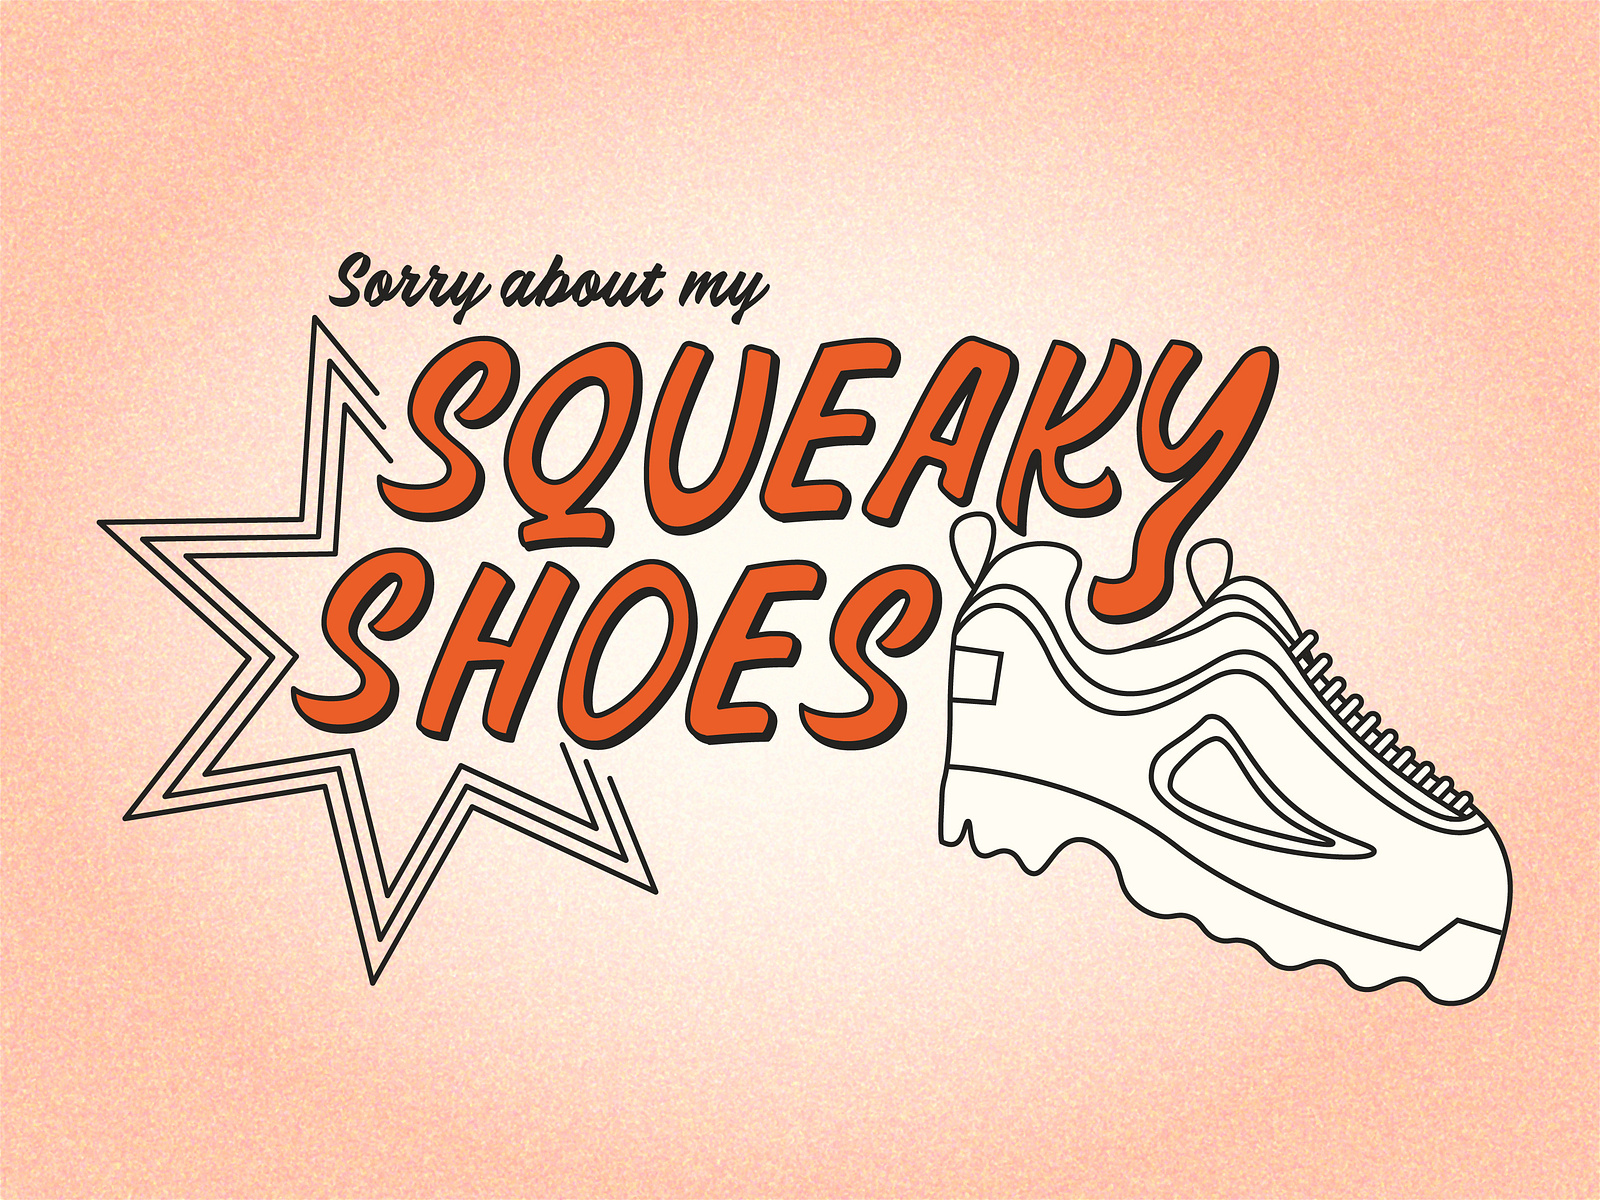 Squeaky Shoes by Haley Argo on Dribbble